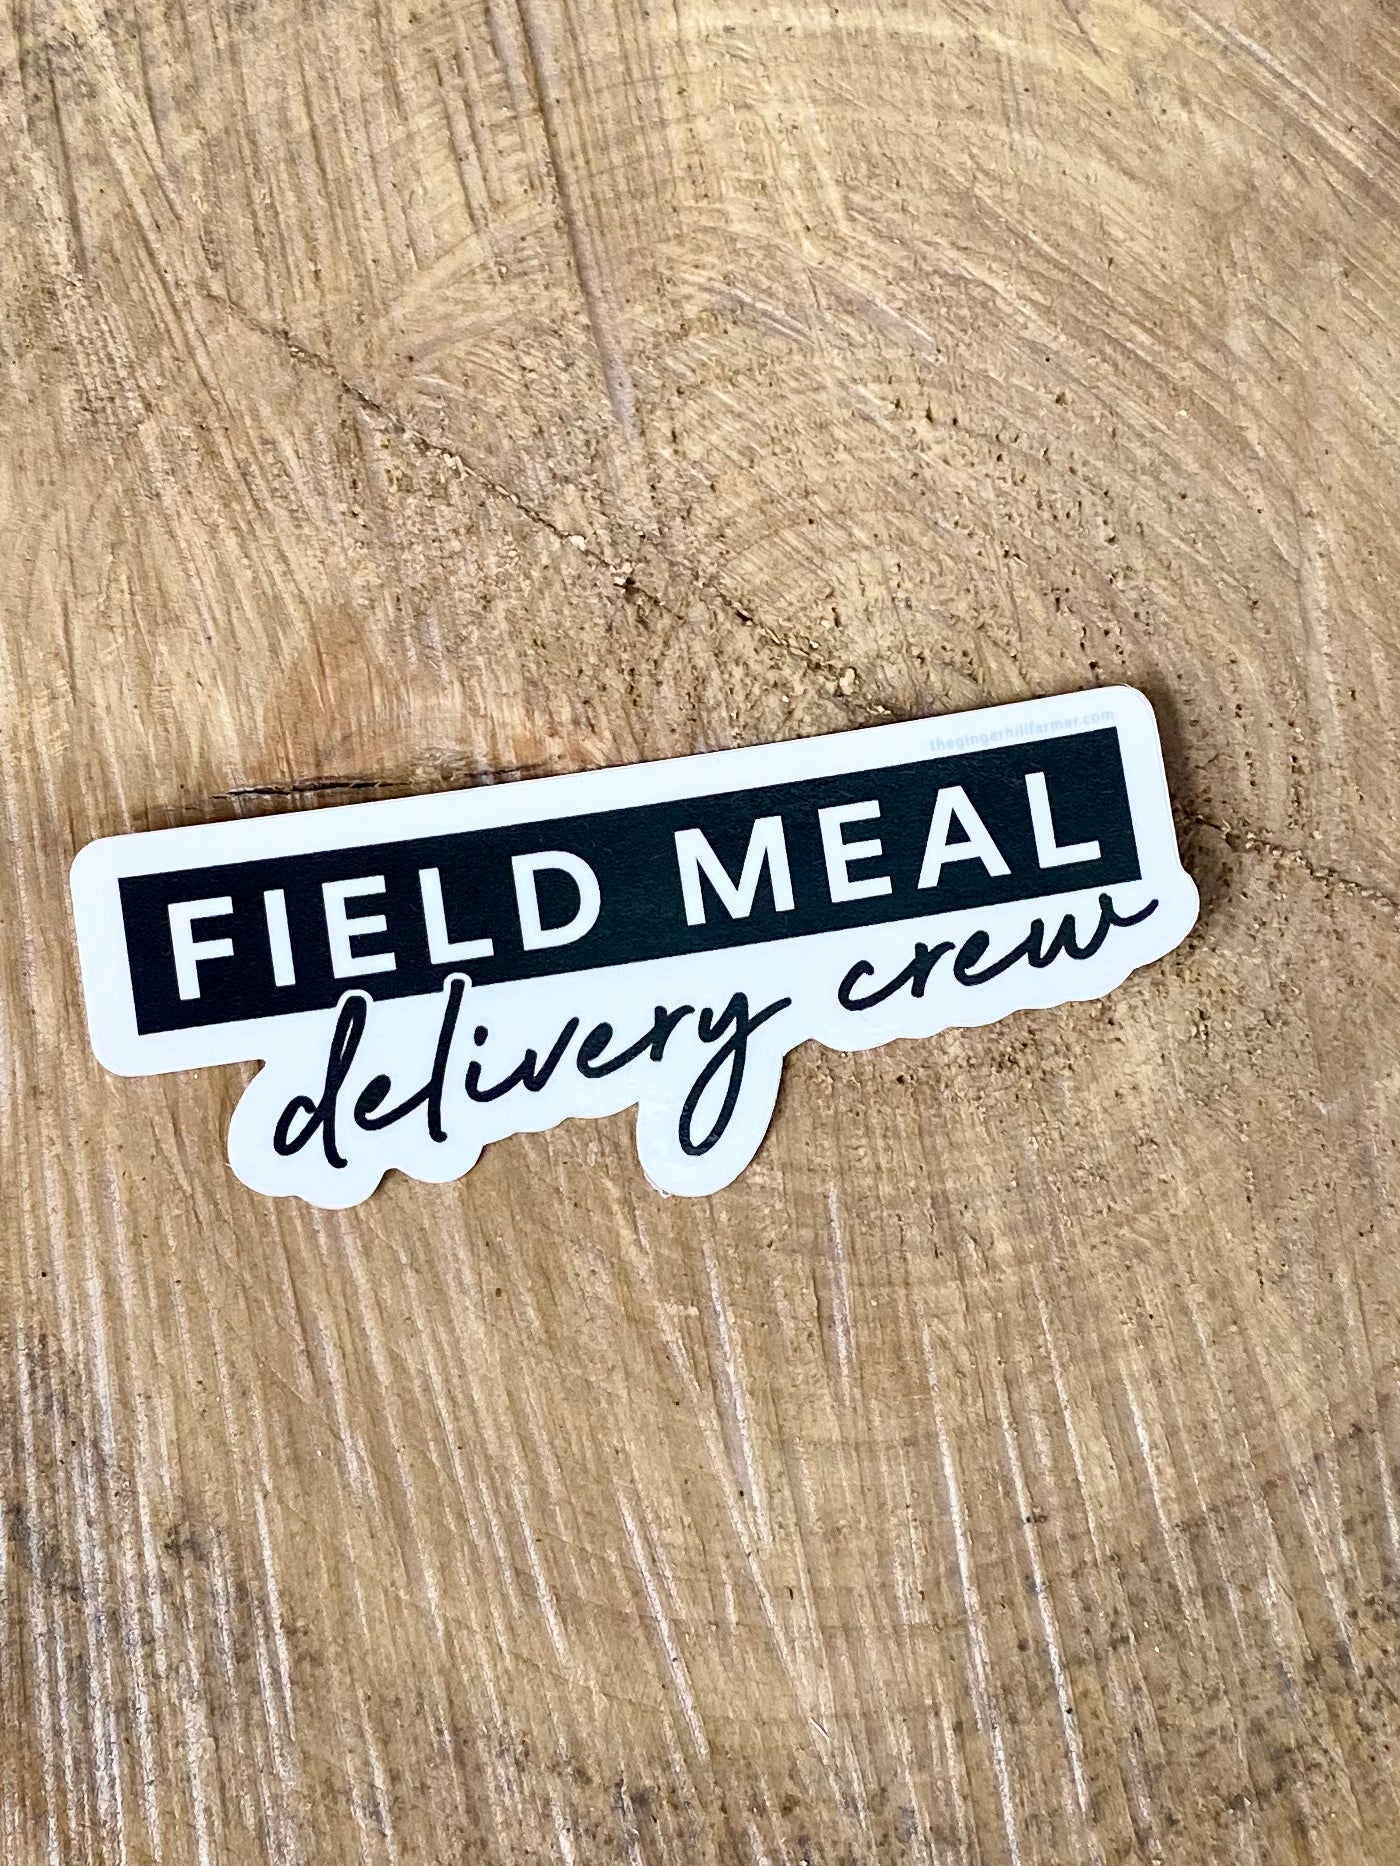 field meal delivery crew close up